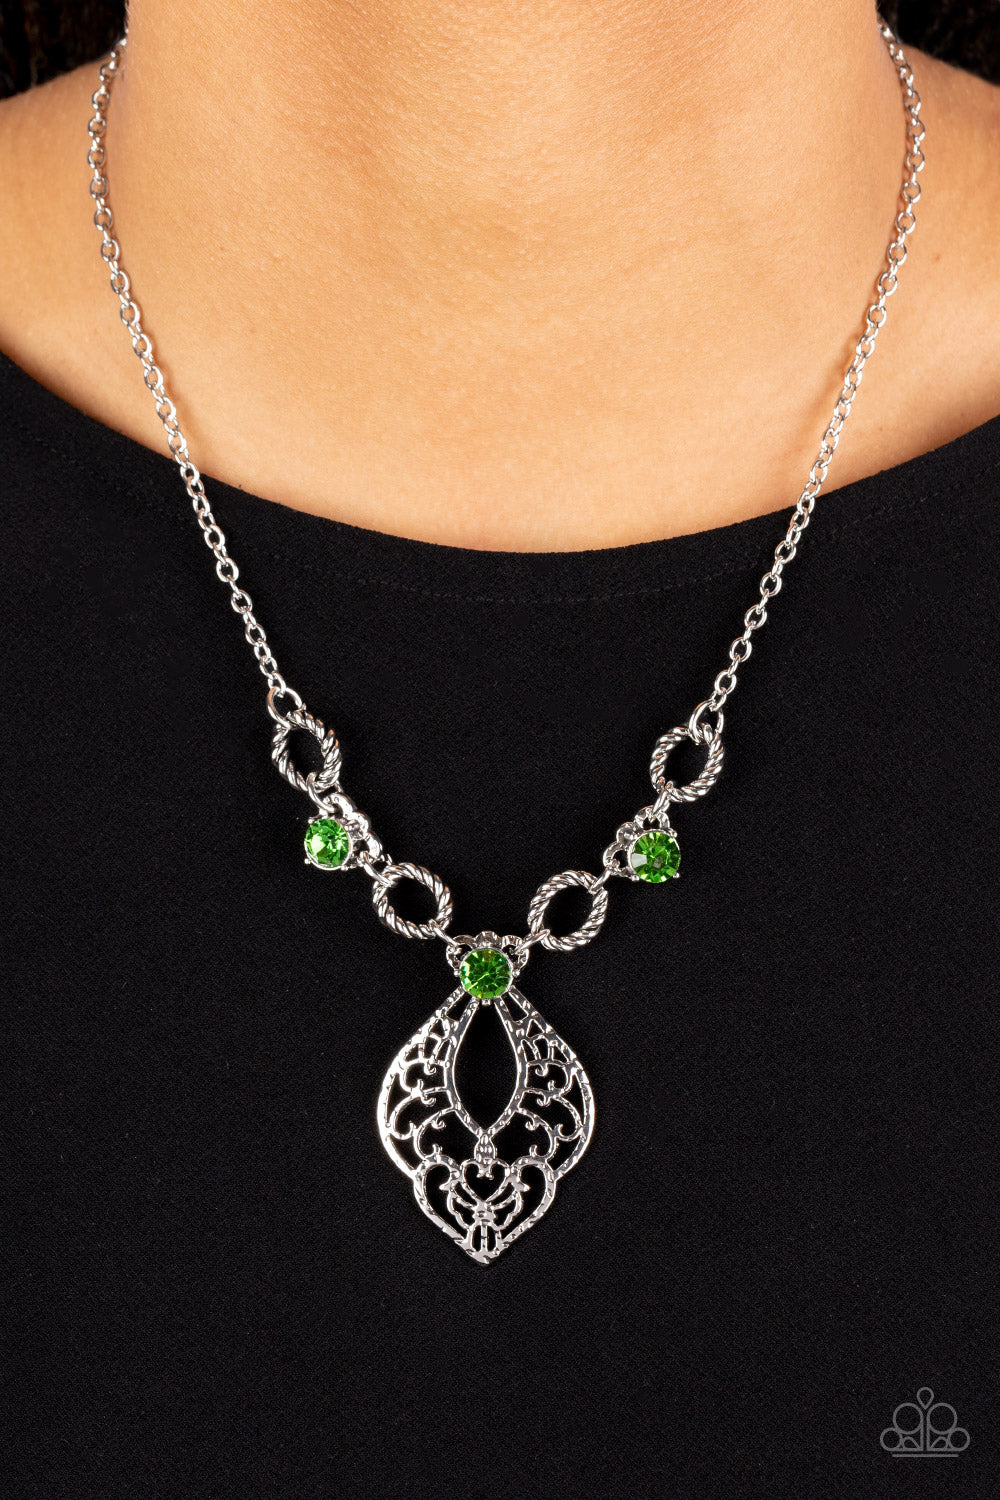 Contemporary Connections - Green Oversized Rhinestones/Hammered Silver Filigree Pendant Paparazzi Necklace & matching earrings